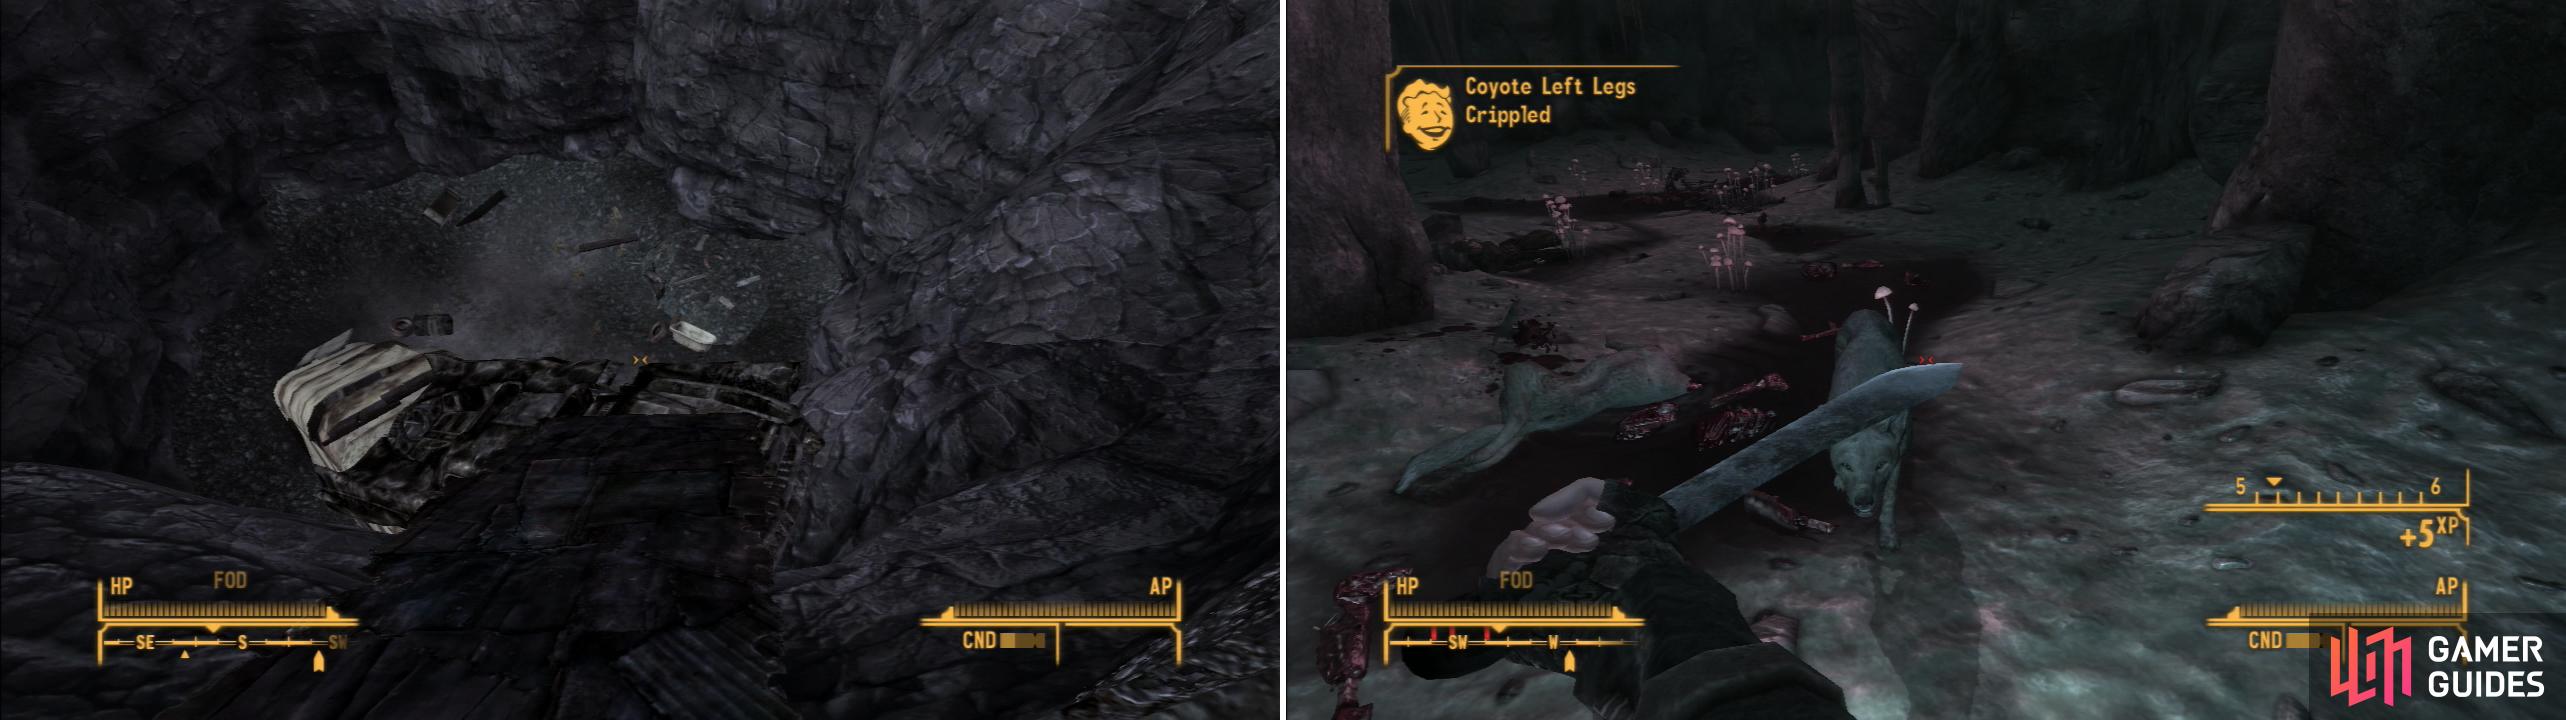 Descend into the Devil’s Gullet by using a precarious ramp made of ruined vehicles and scrap (left). In the Goodpsrings Cave you’ll find a pack of Coyotes guarding some corpses (right).